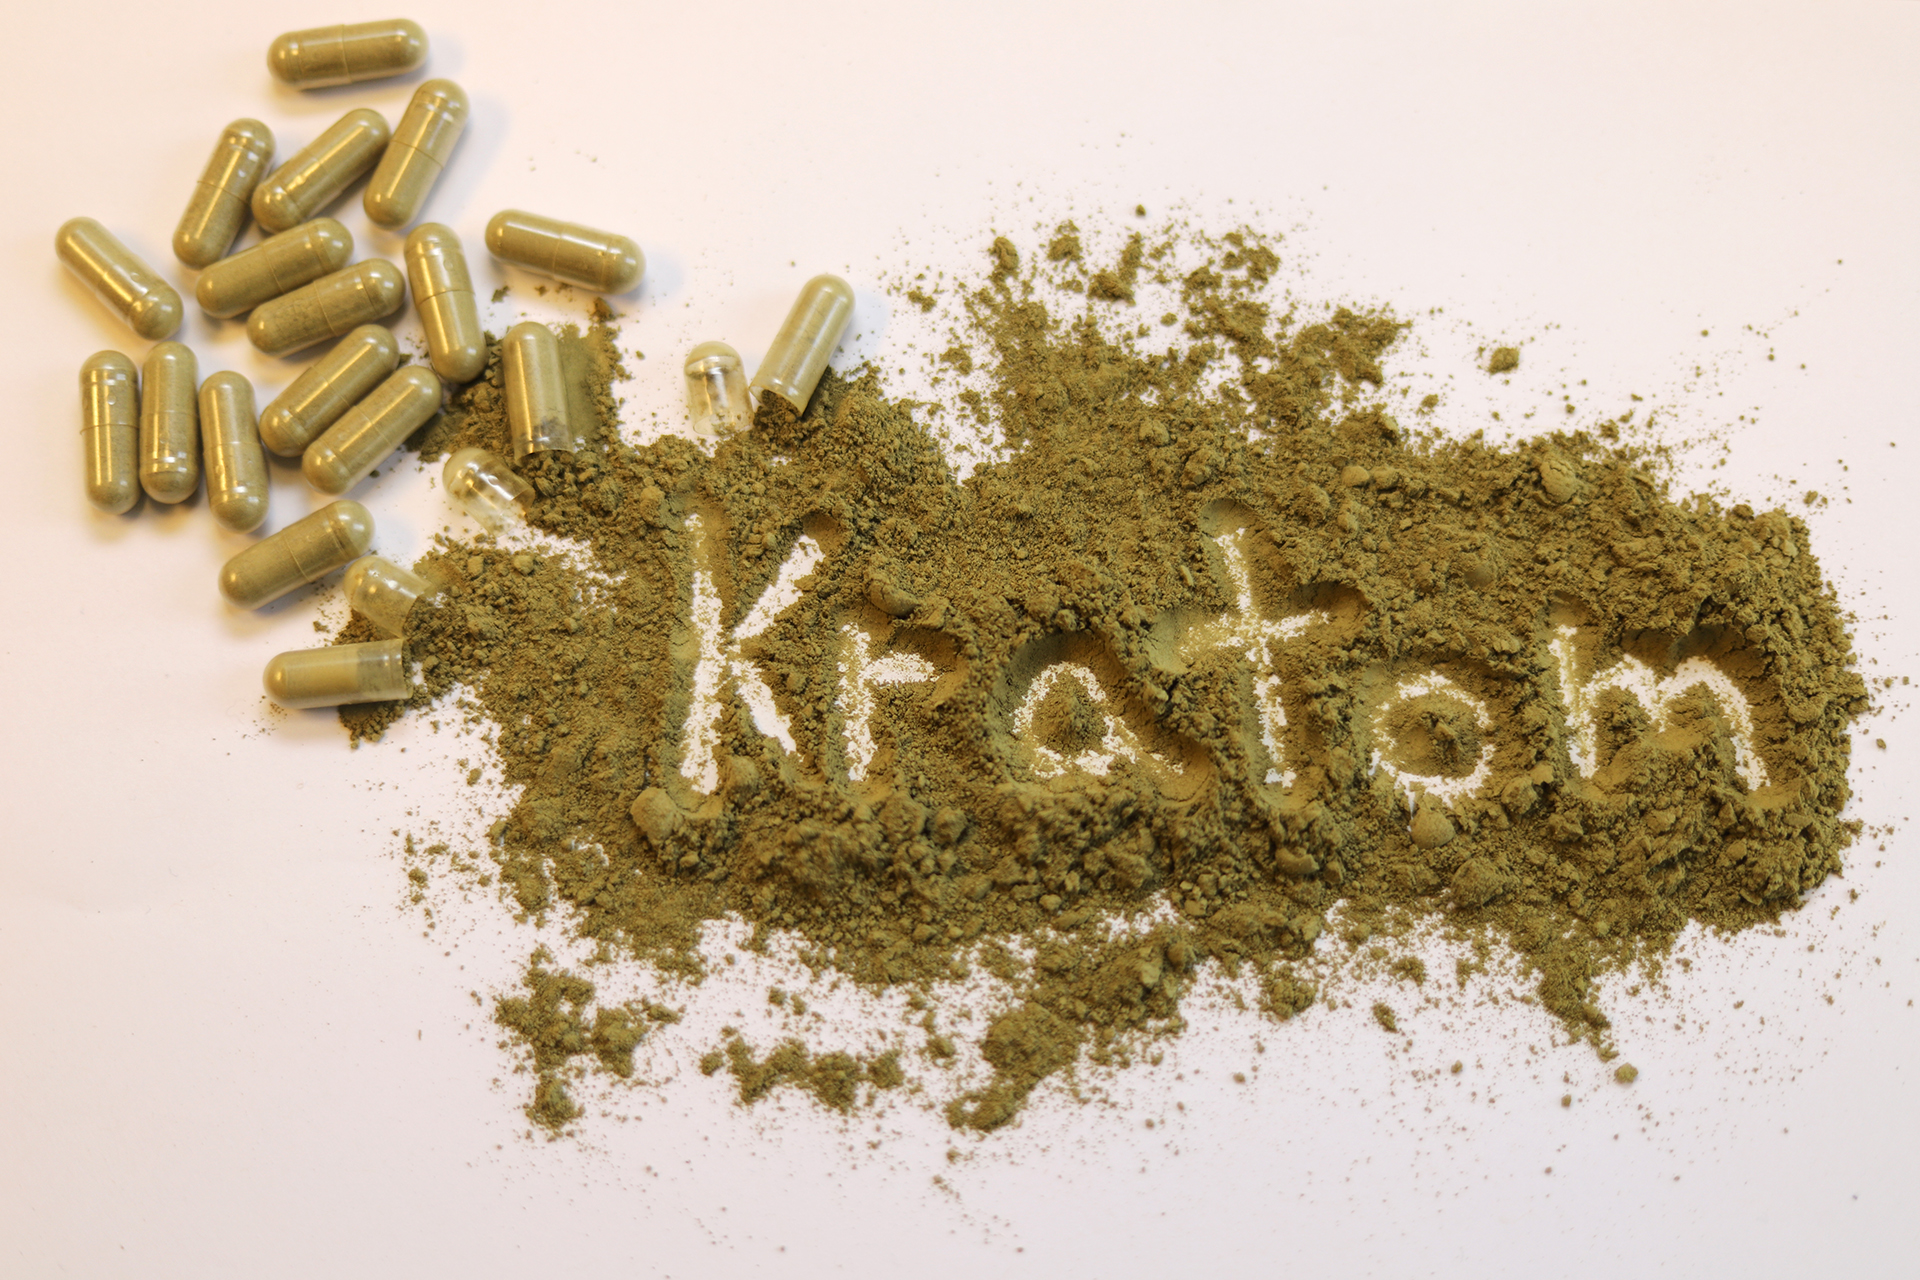 Kratom Is About to Surge in Popularity Thanks to UN’s Decision Not to Ban It